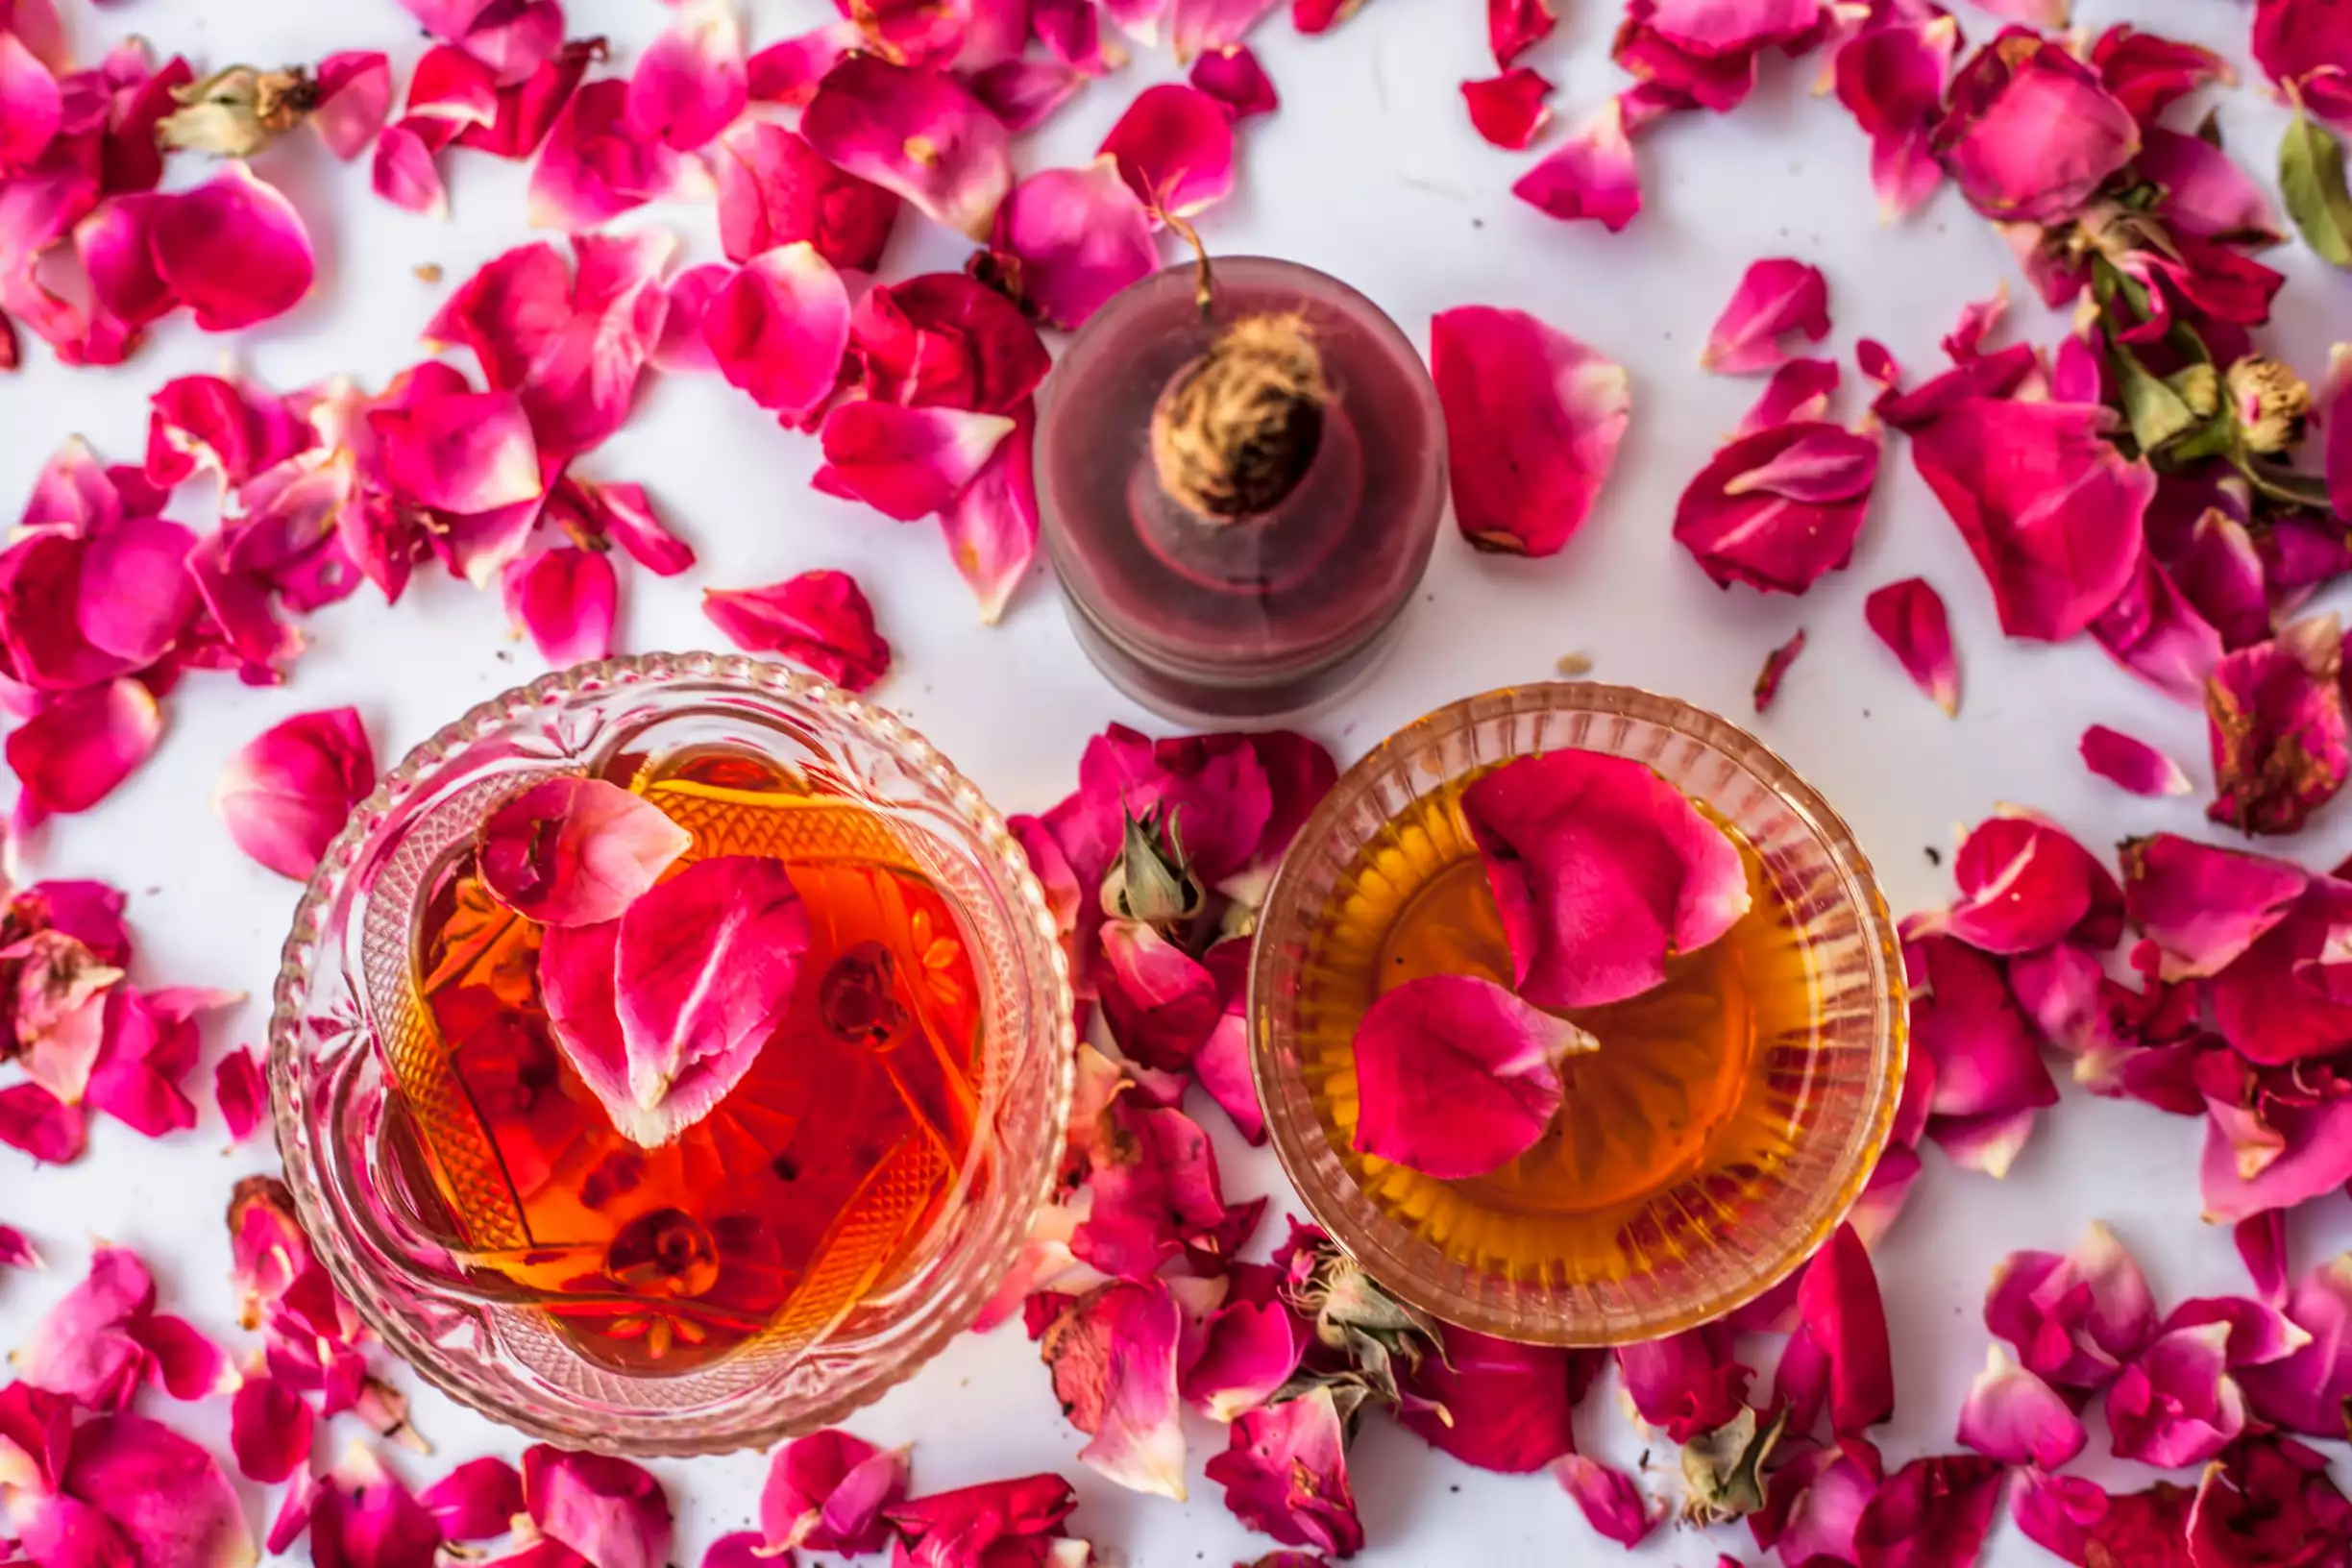 10 Rose Absolute Essential Oil Recipes - DIY Aromatherapy Blends, Recipe